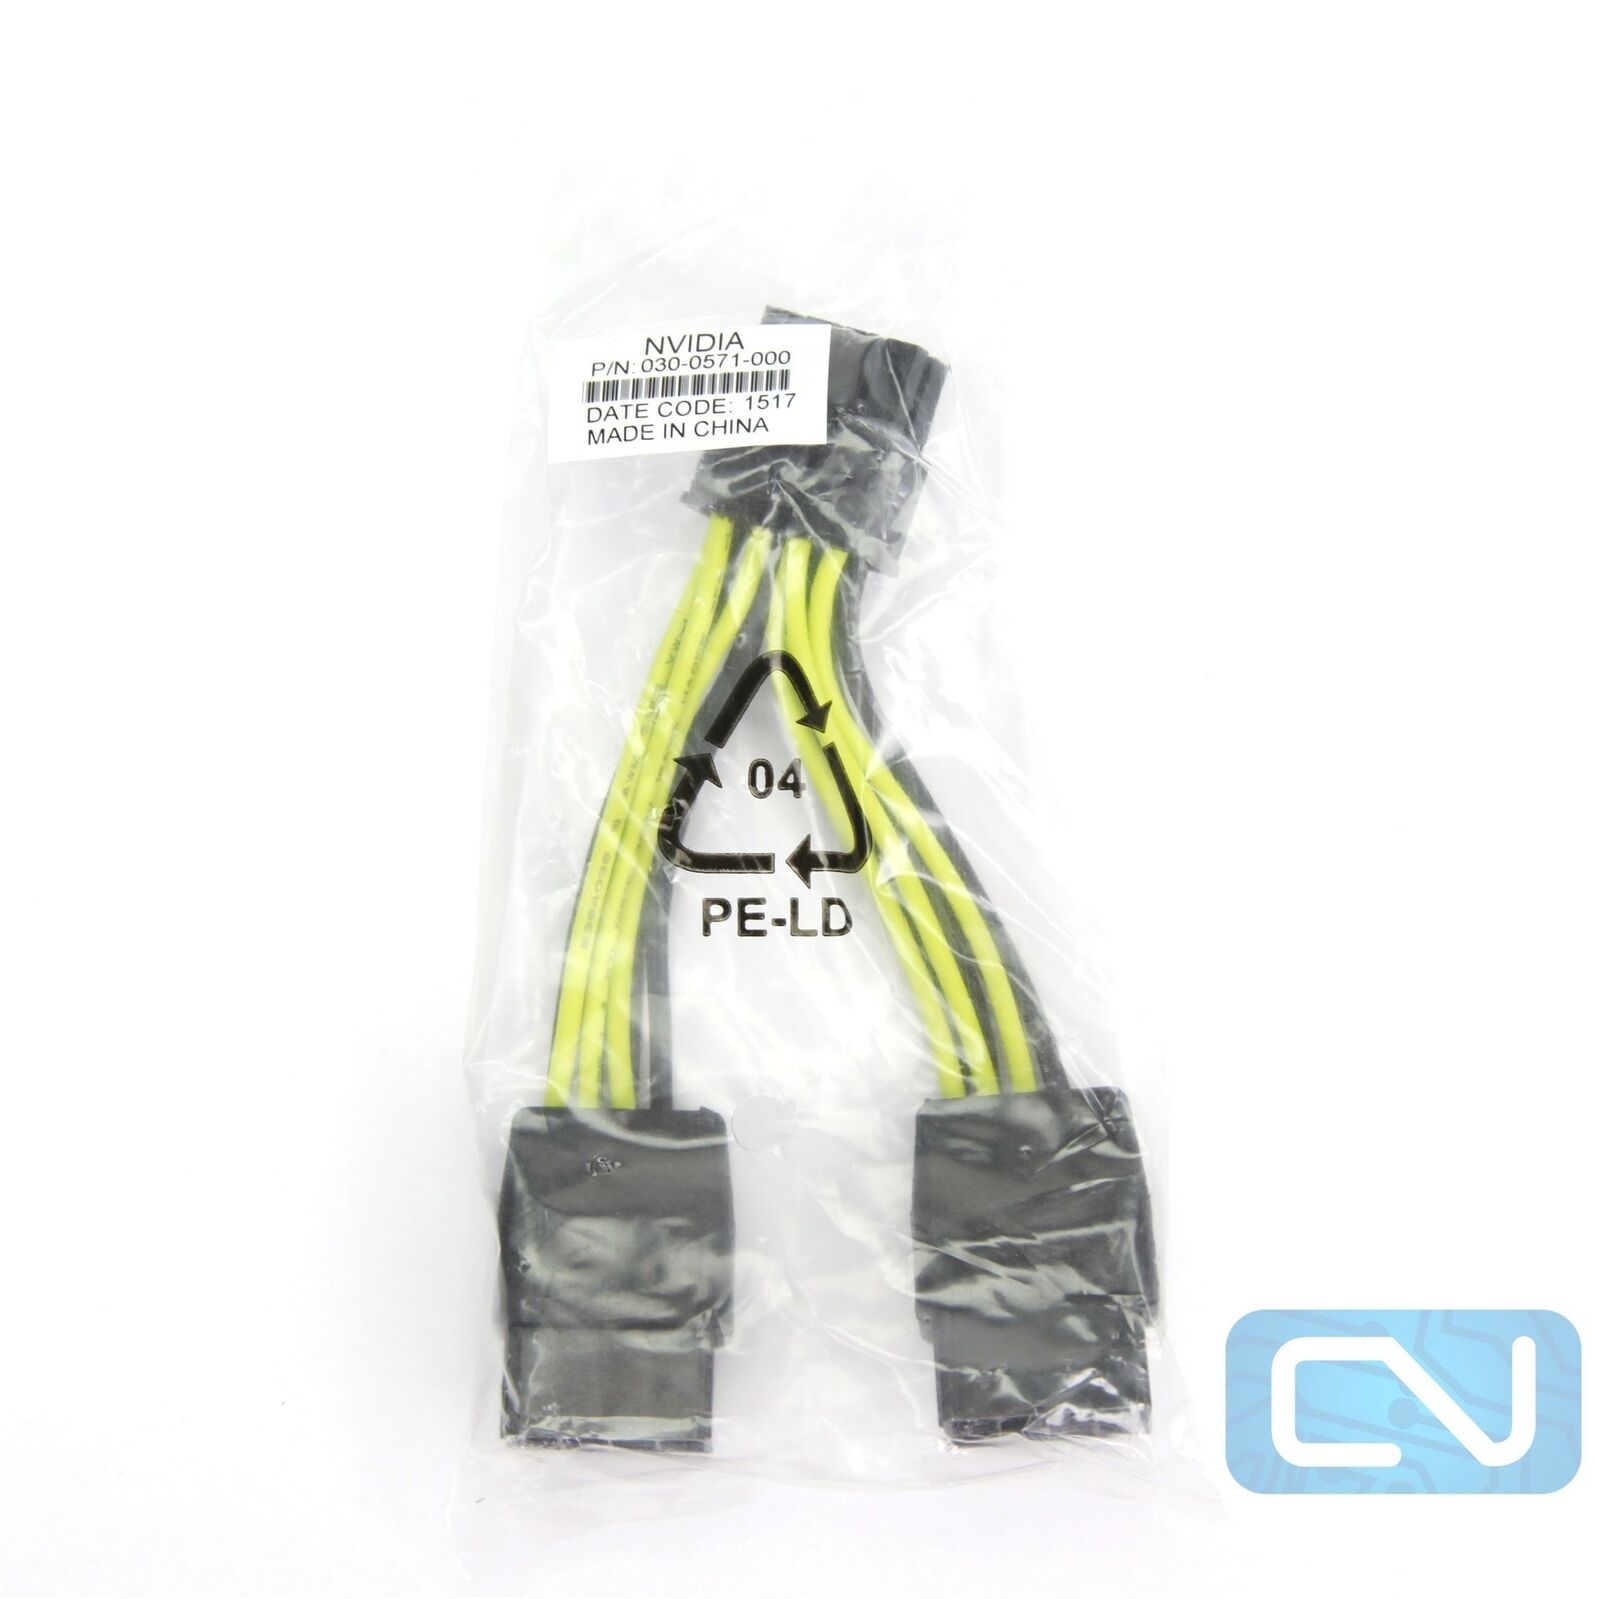 NEW NVIDIA Dual 8 to 8 Graphics Power Cable 030-0571-000 Tesla K80 M60 M40 P100